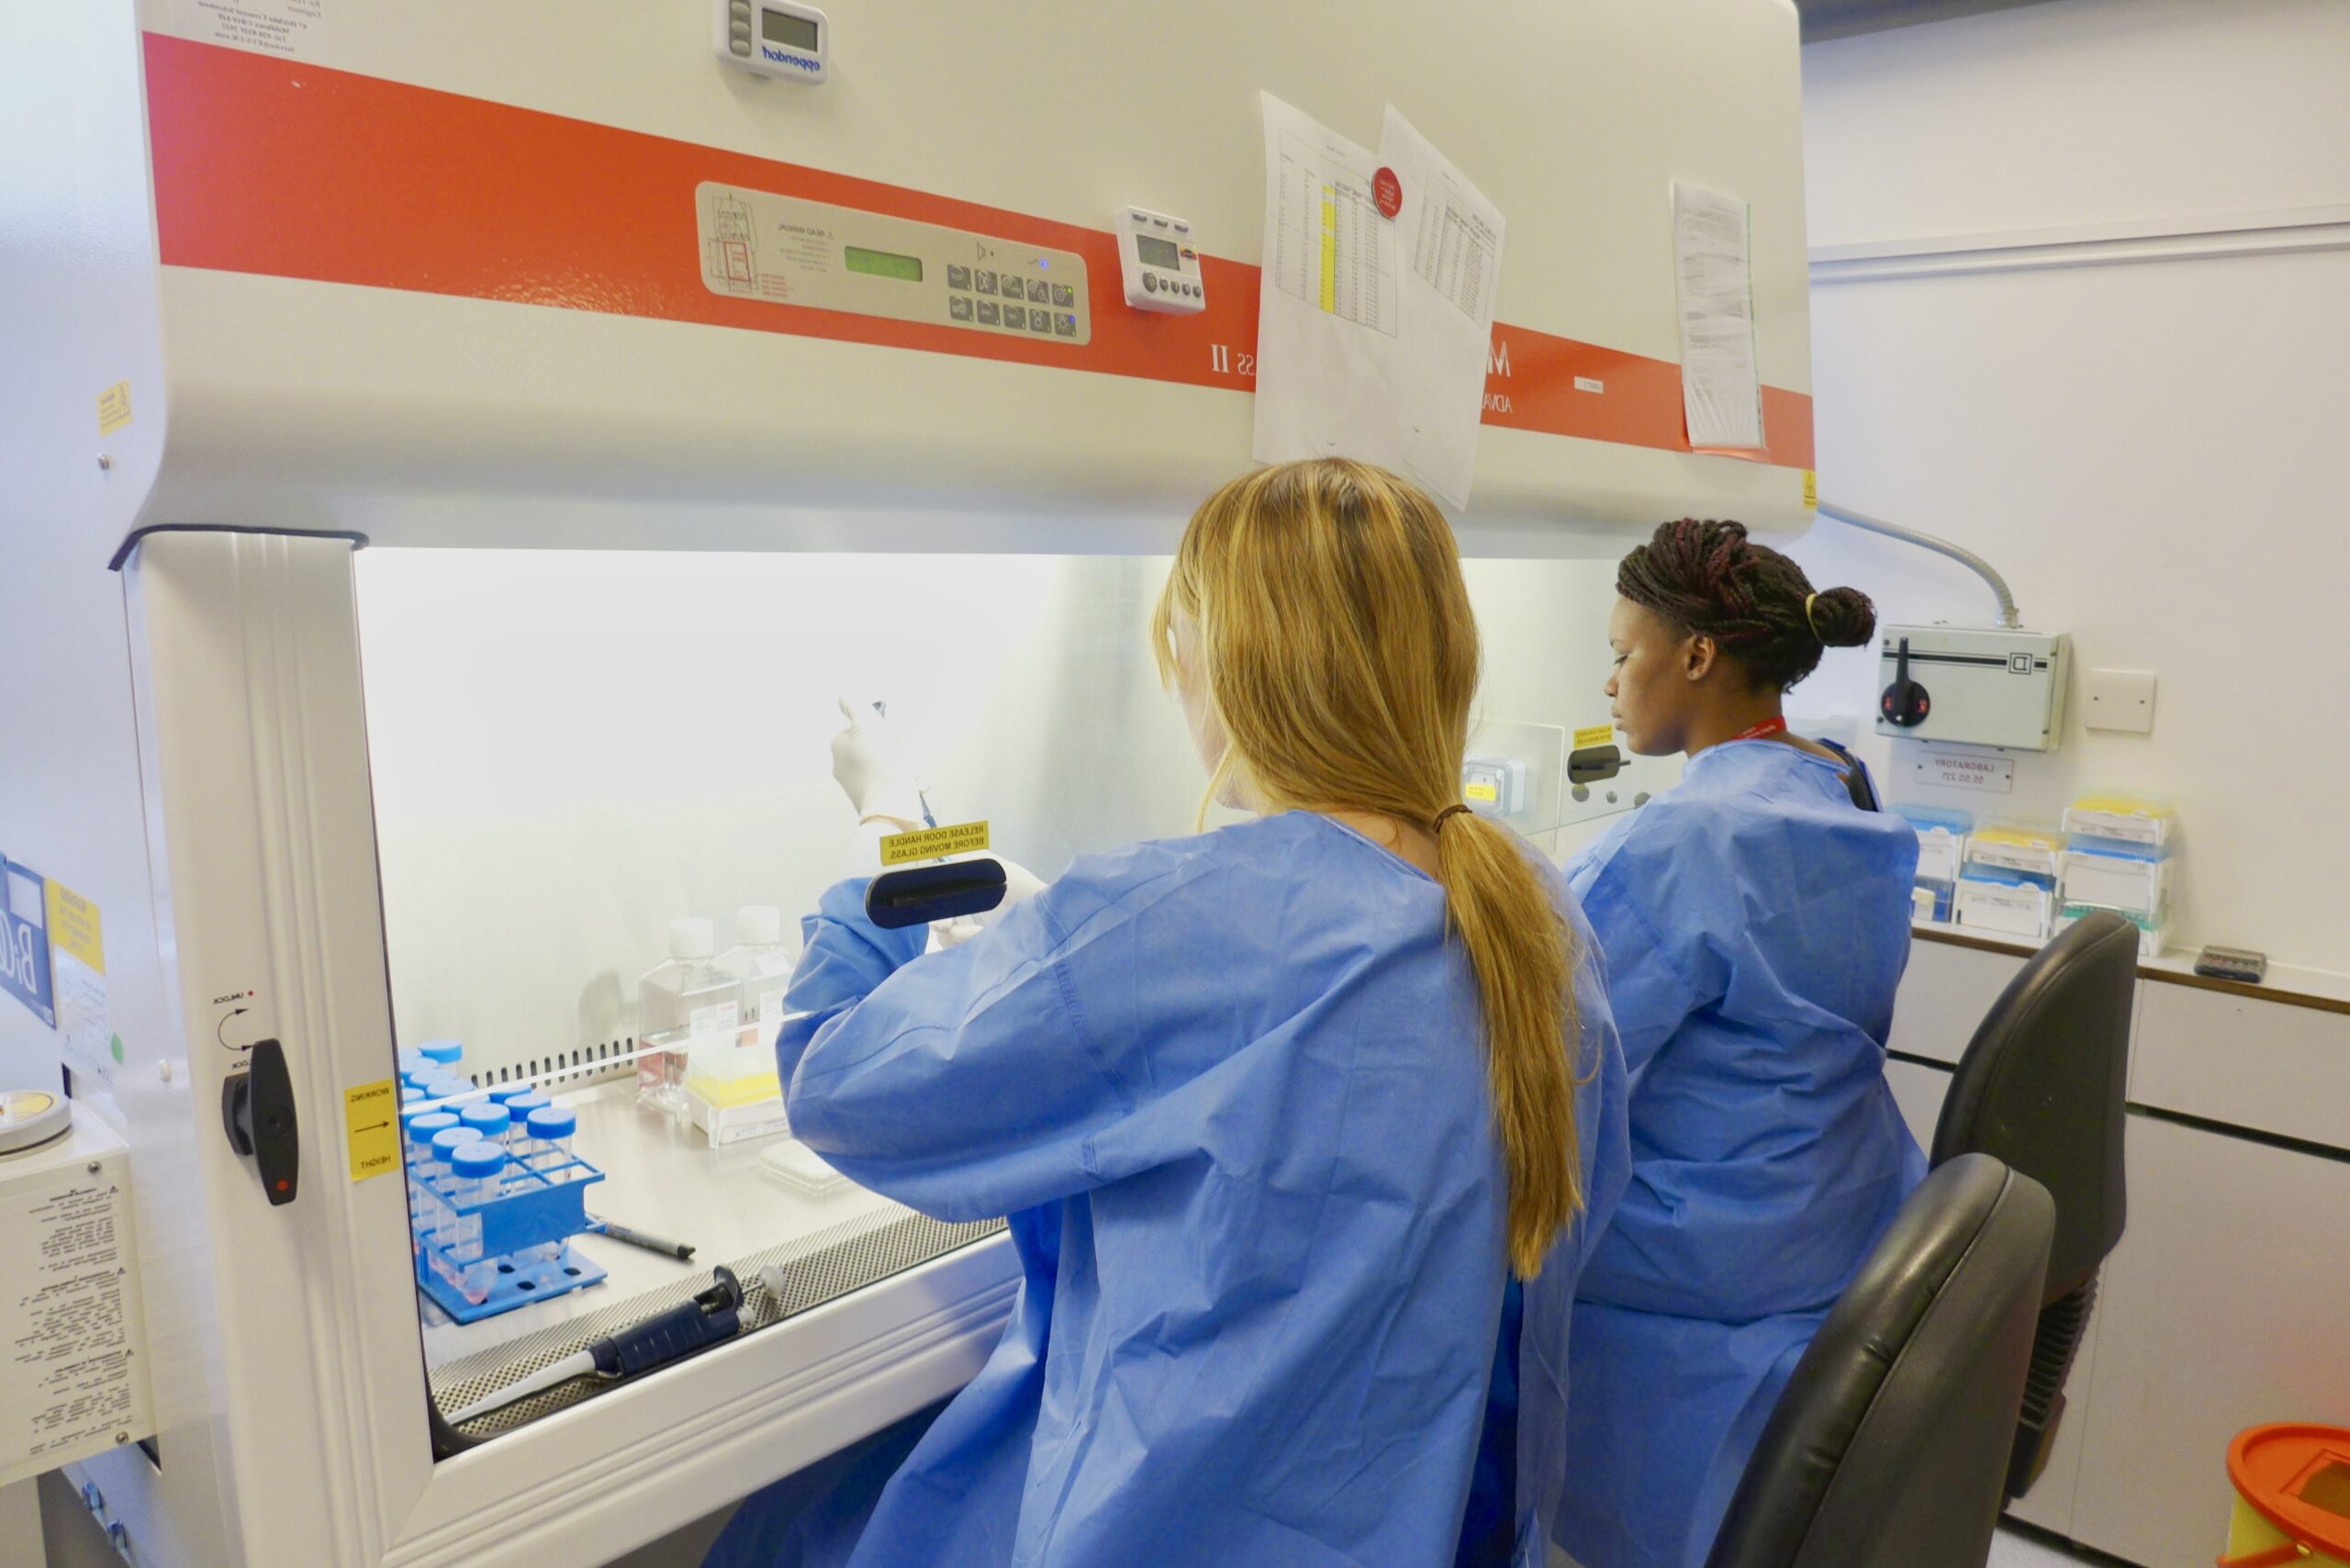 Scientists working at the IAVI Human Immunology Laboratory in London